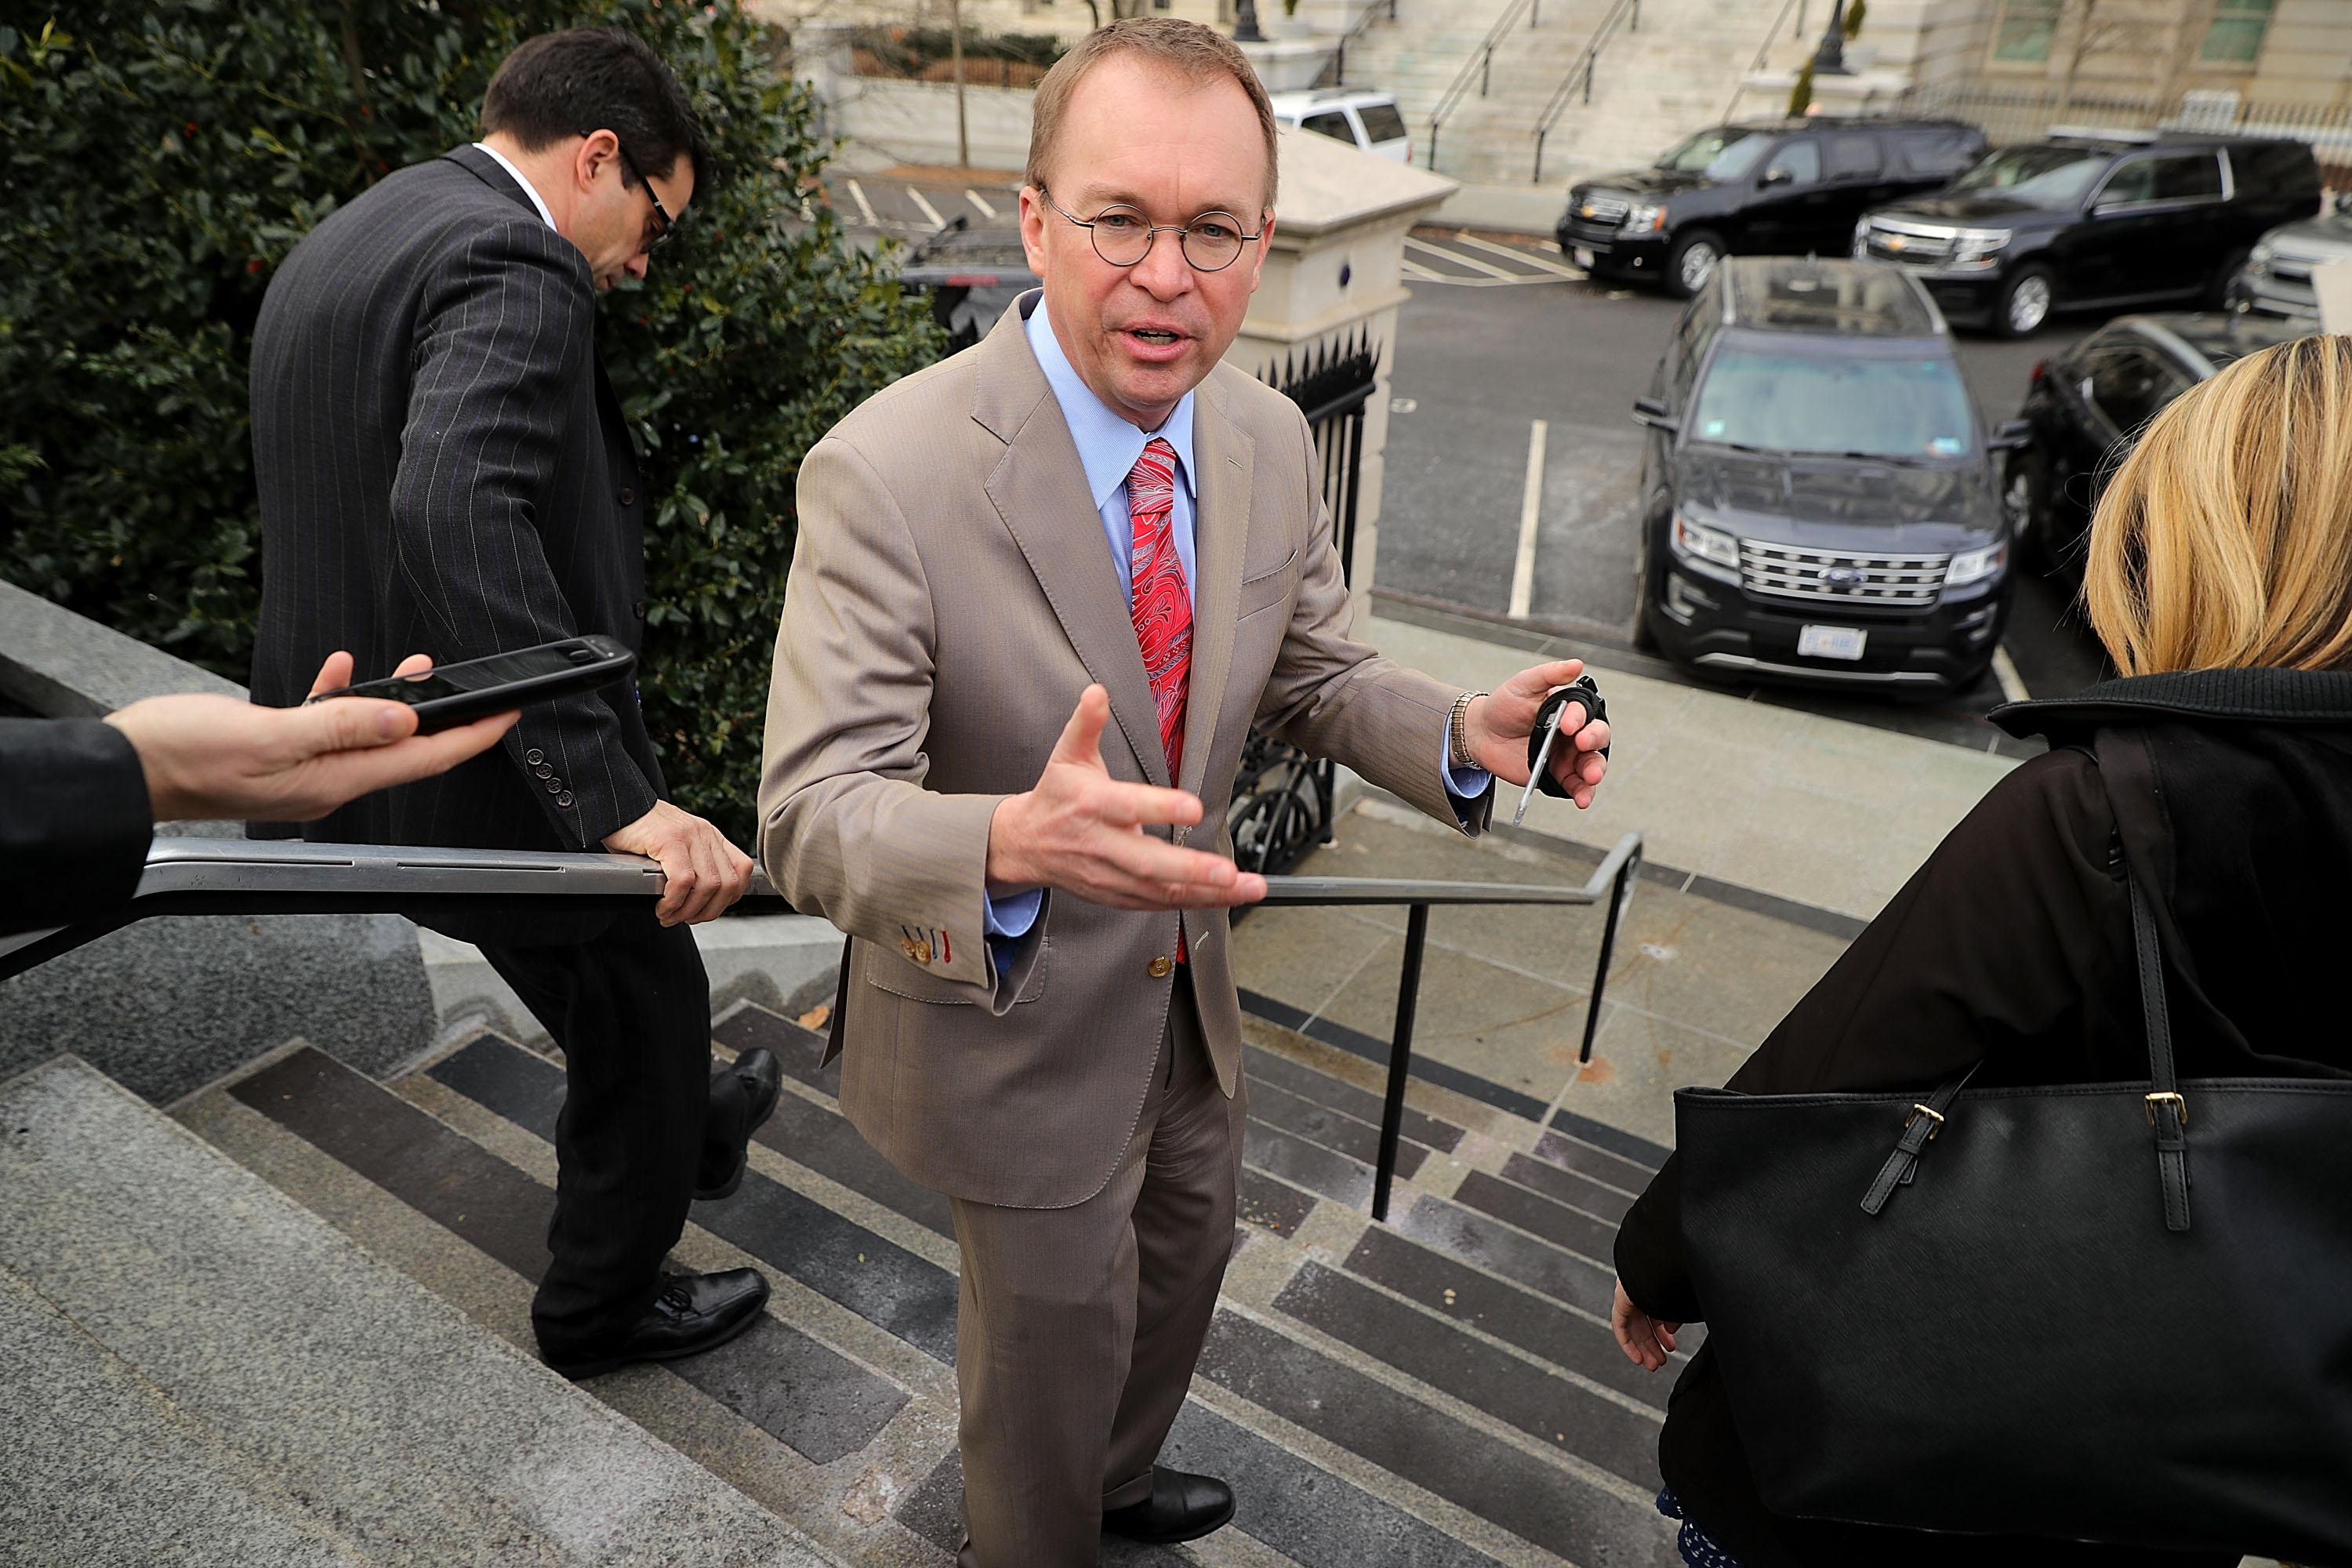 WASHINGTON, DC - JANUARY 22:  Office of Management and Budget Director Mick Mulvaney talks briefly to reporters about the ongoing partial federal government shutdown outside the White House January 22, 2018 in Washington, DC. Lawmakers and the White House continue to negotiate an end to the shutdown with a vote scheduled for noon in the U.S. Senate.  (Photo by Chip Somodevilla/Getty Images)